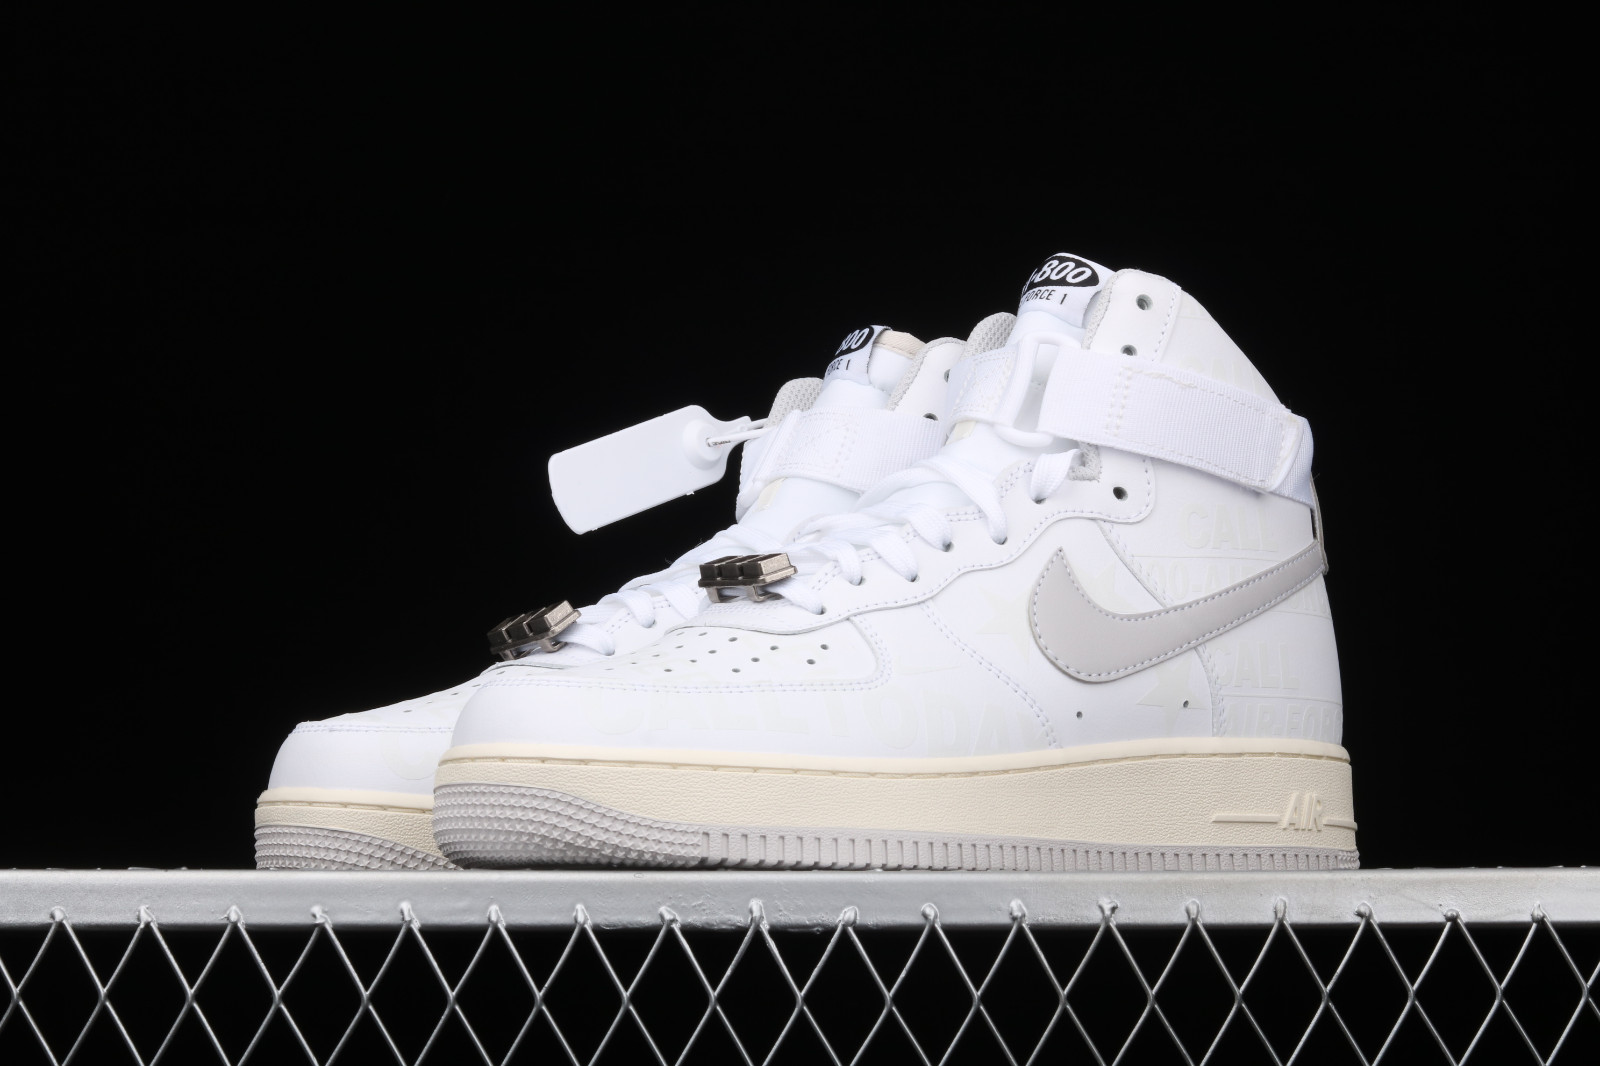 galope crédito caballo de Troya GmarShops - Nike Air Force 1 Comfort Huarache OG White - 100 - Nike Air  Force 1 07 Premium Toll Free White Grey Running Shoes CU1414